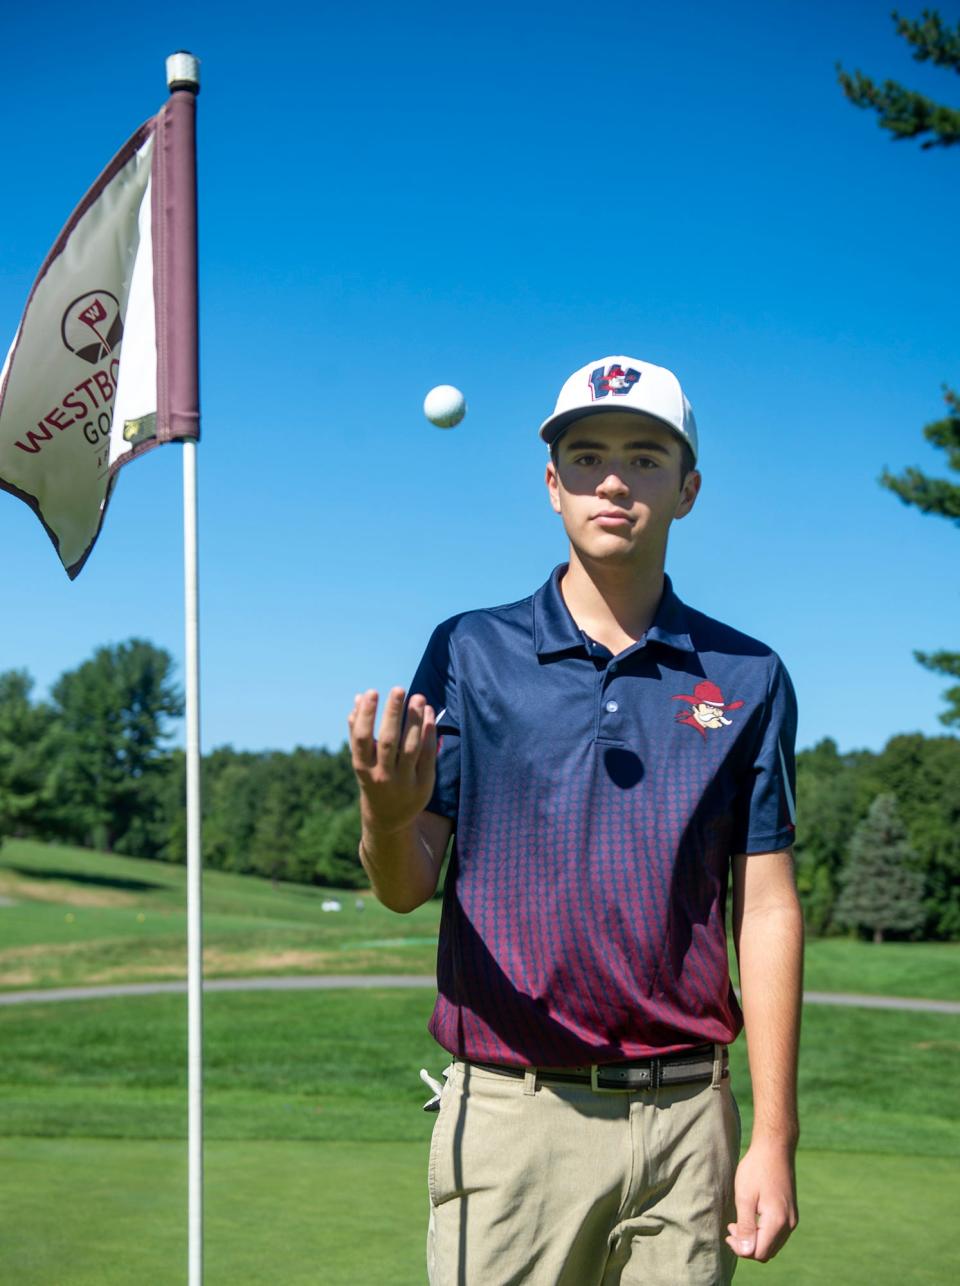 Westborough High School junior Aaron Schwartz on the 7th green at the Westborough Country Club, Sept.8, 2022, where he sunk a hole in one recently.